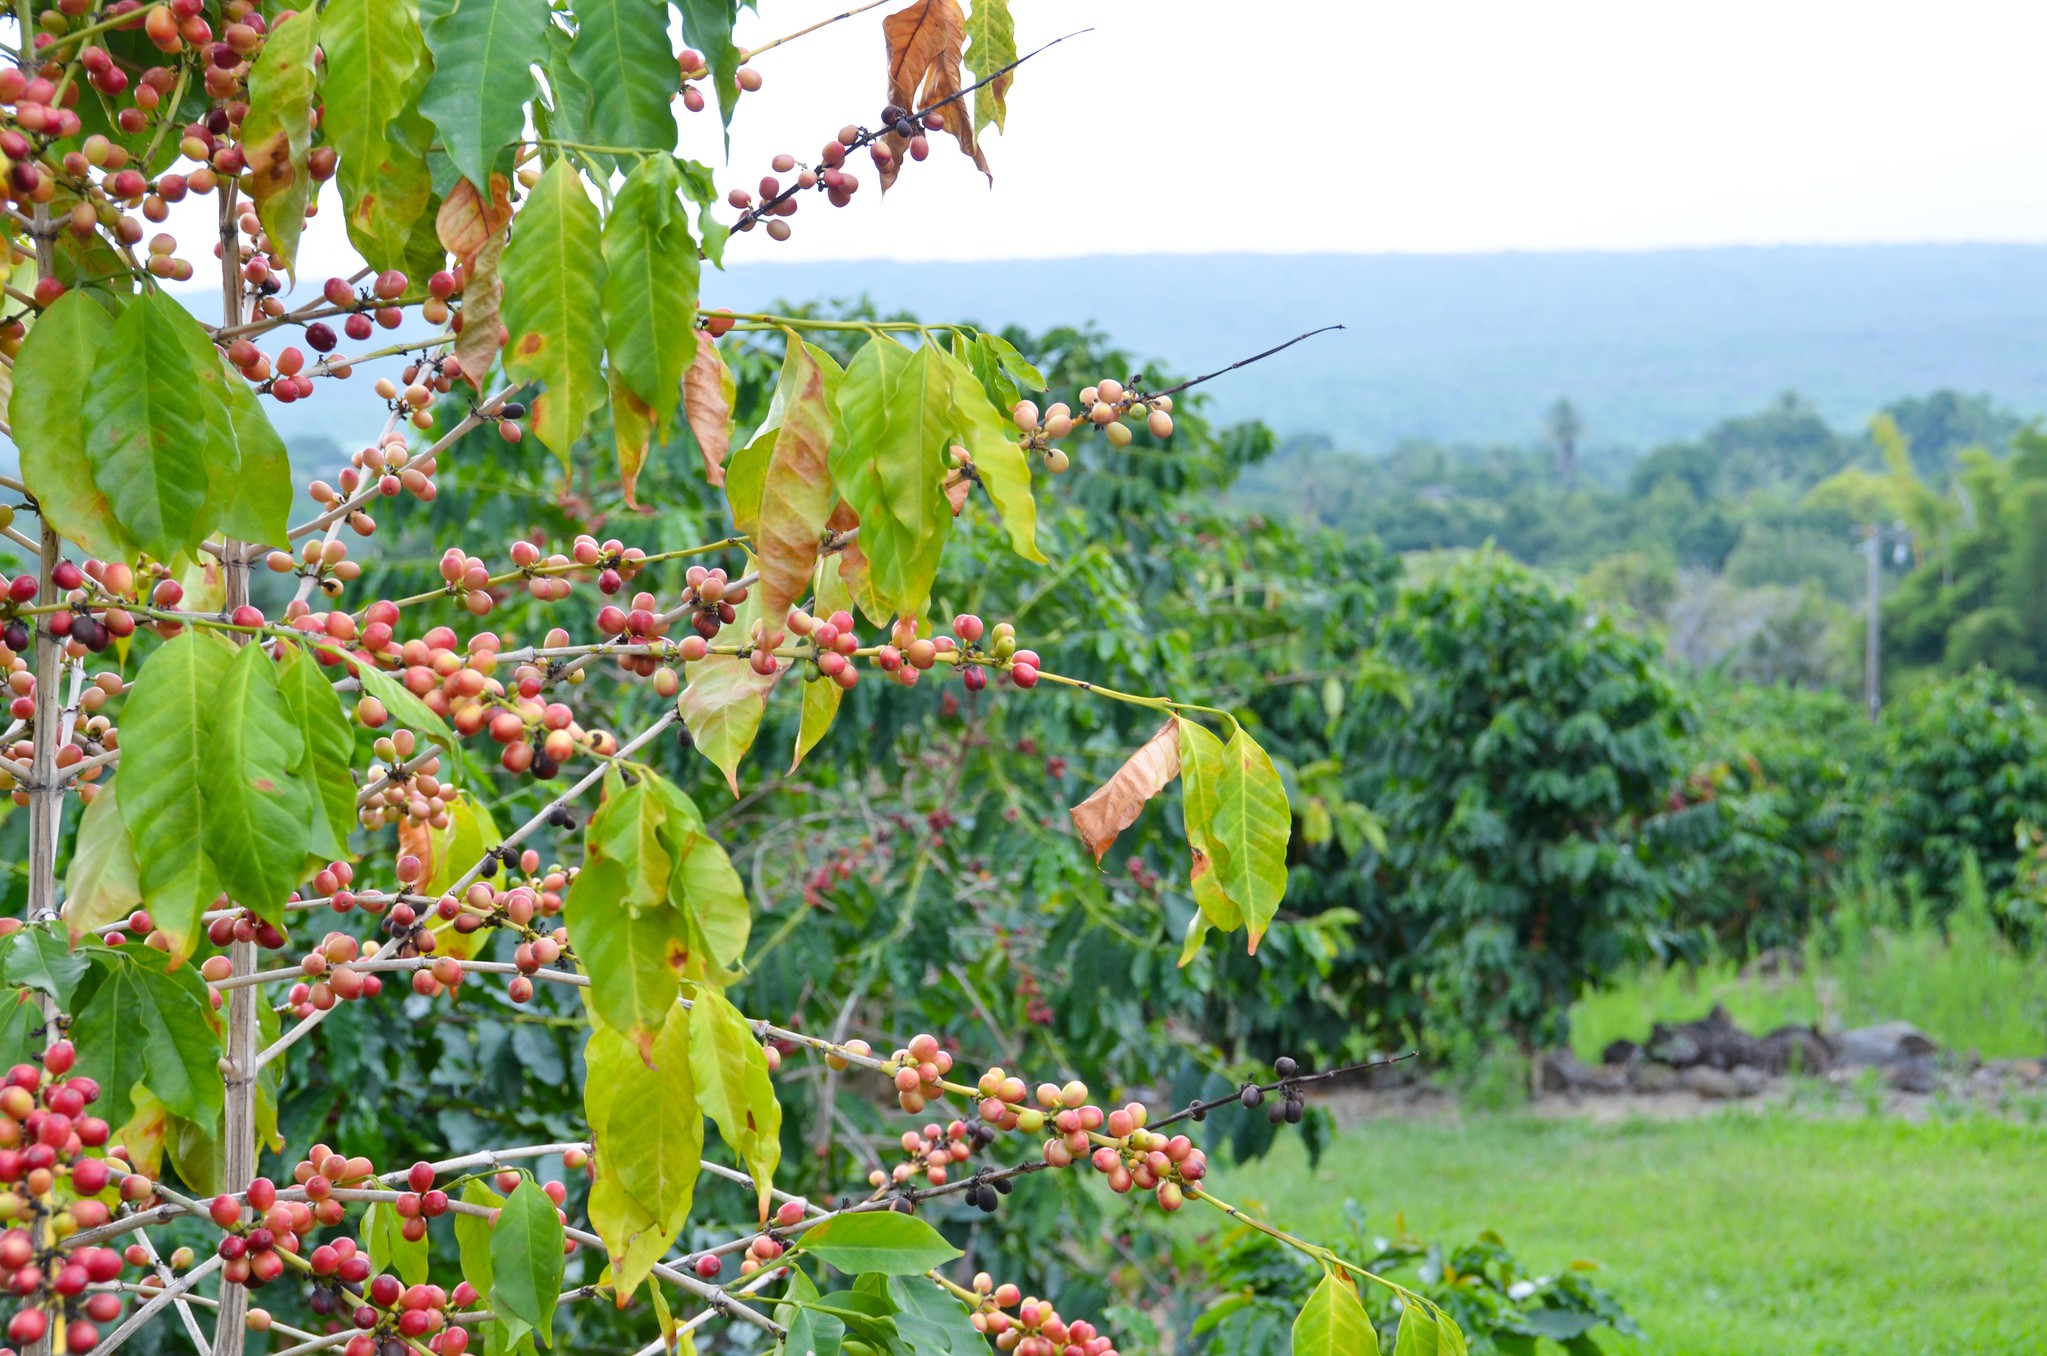 Kona coffee plants are grown at a lower altitude than other Arabica trees